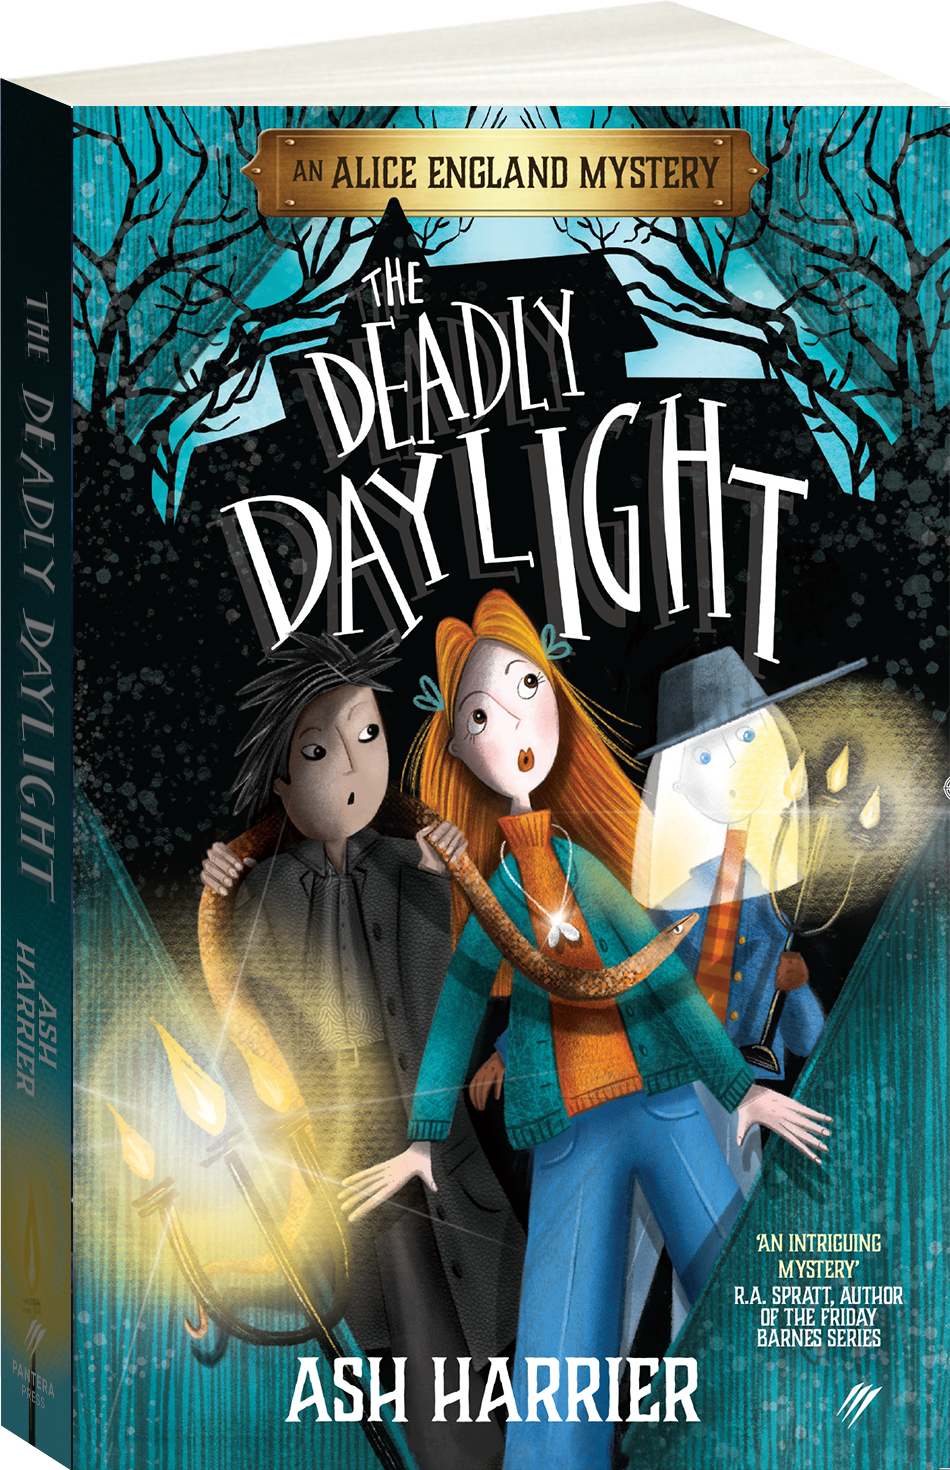 The Deadly Daylight Cover Image